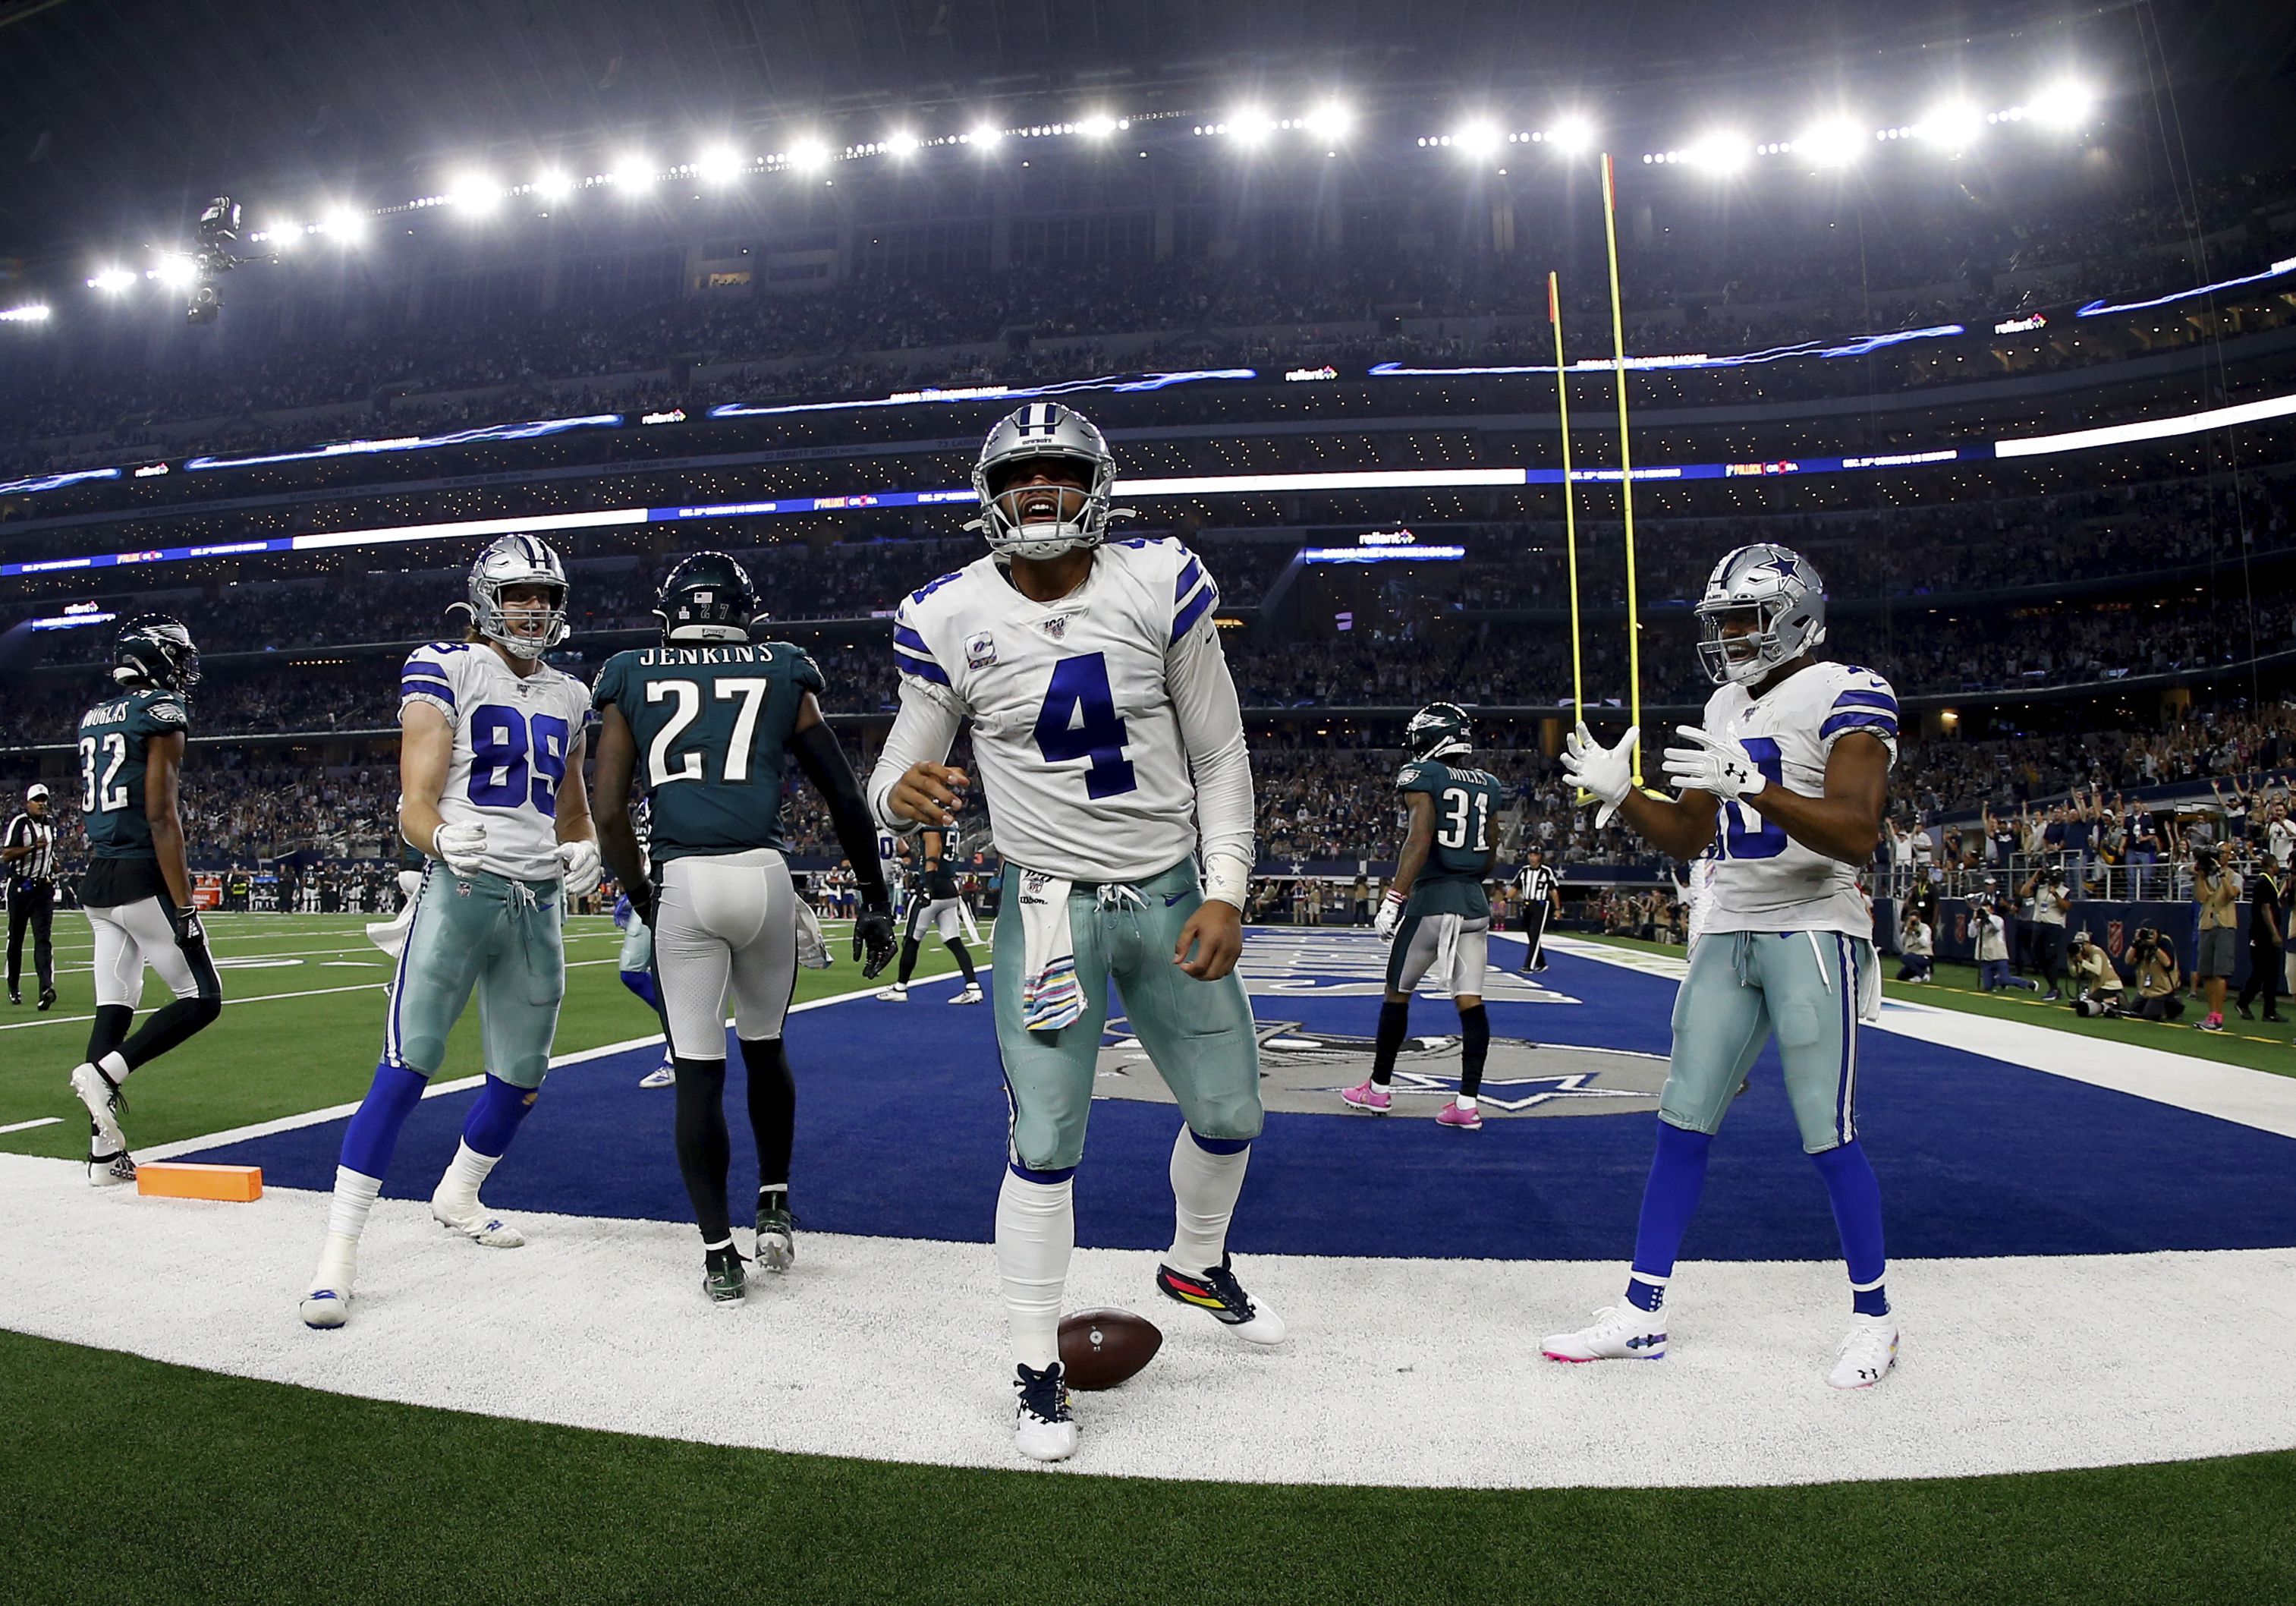 Eagles Vs Cowboys Injury List - Cowboys, eagles meet in altered states, close to elimination the